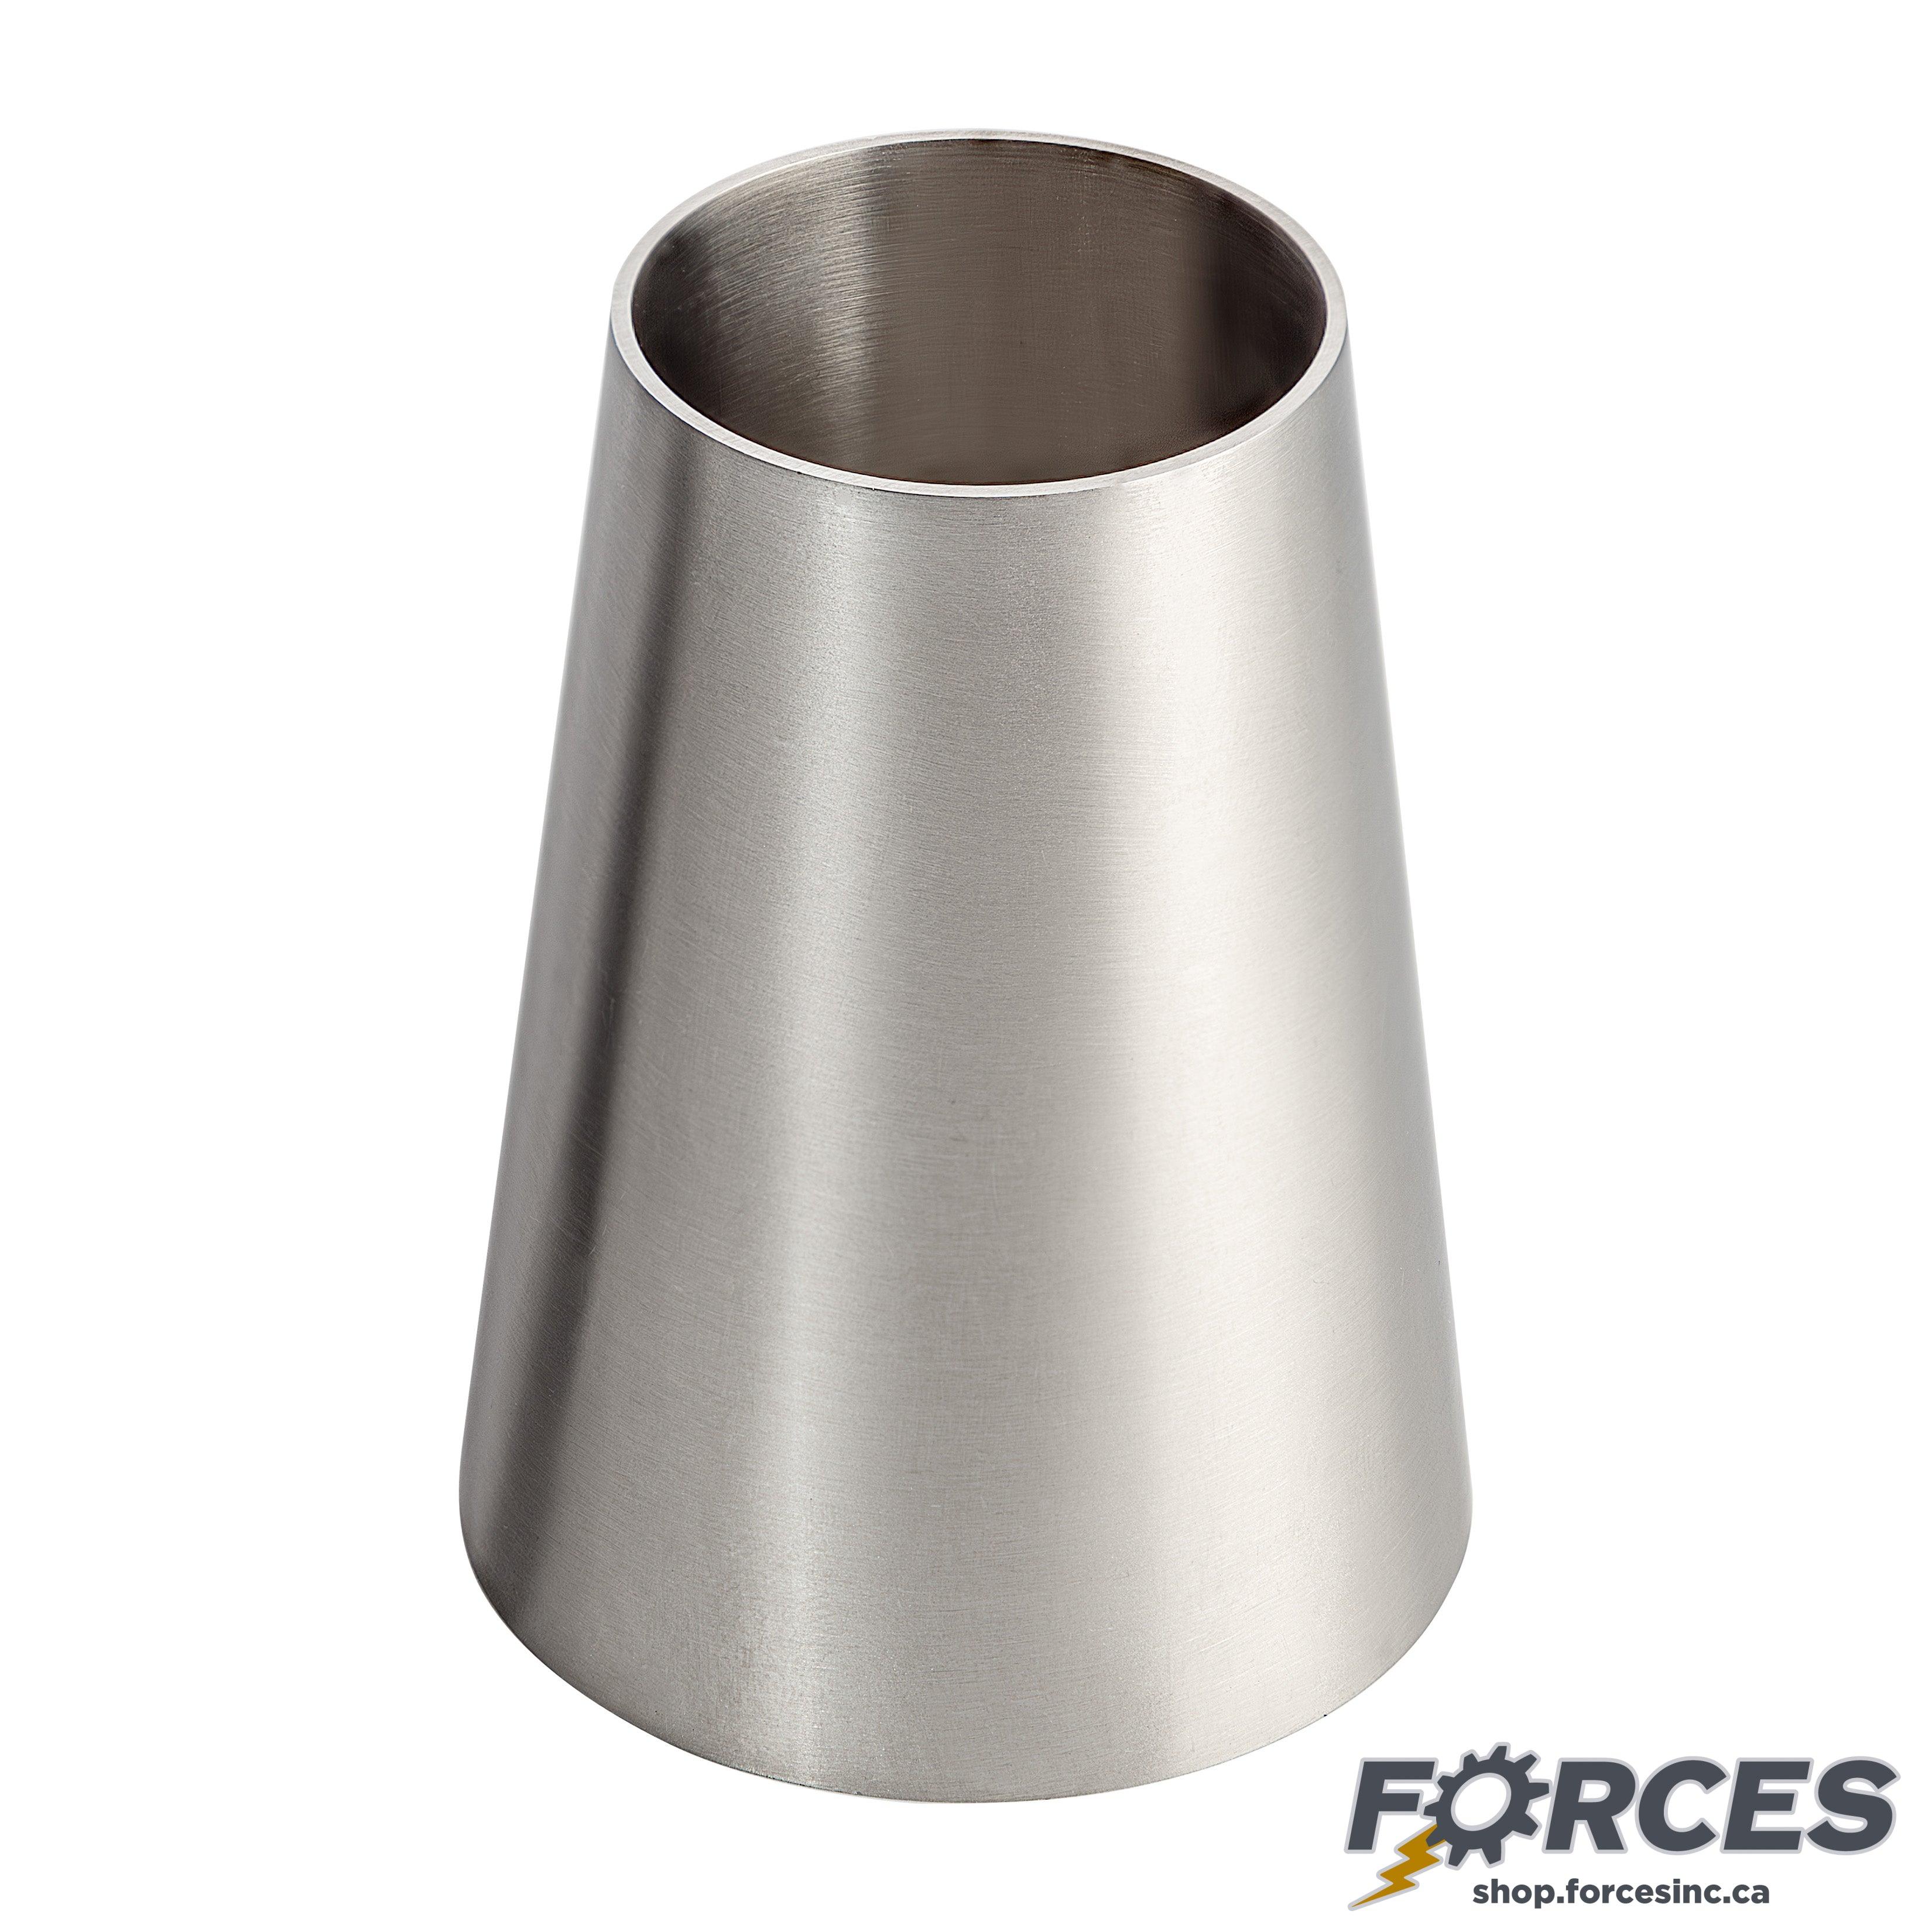 4" x 3" Butt Weld Concentric Reducer - Stainless Steel 304 - Forces Inc